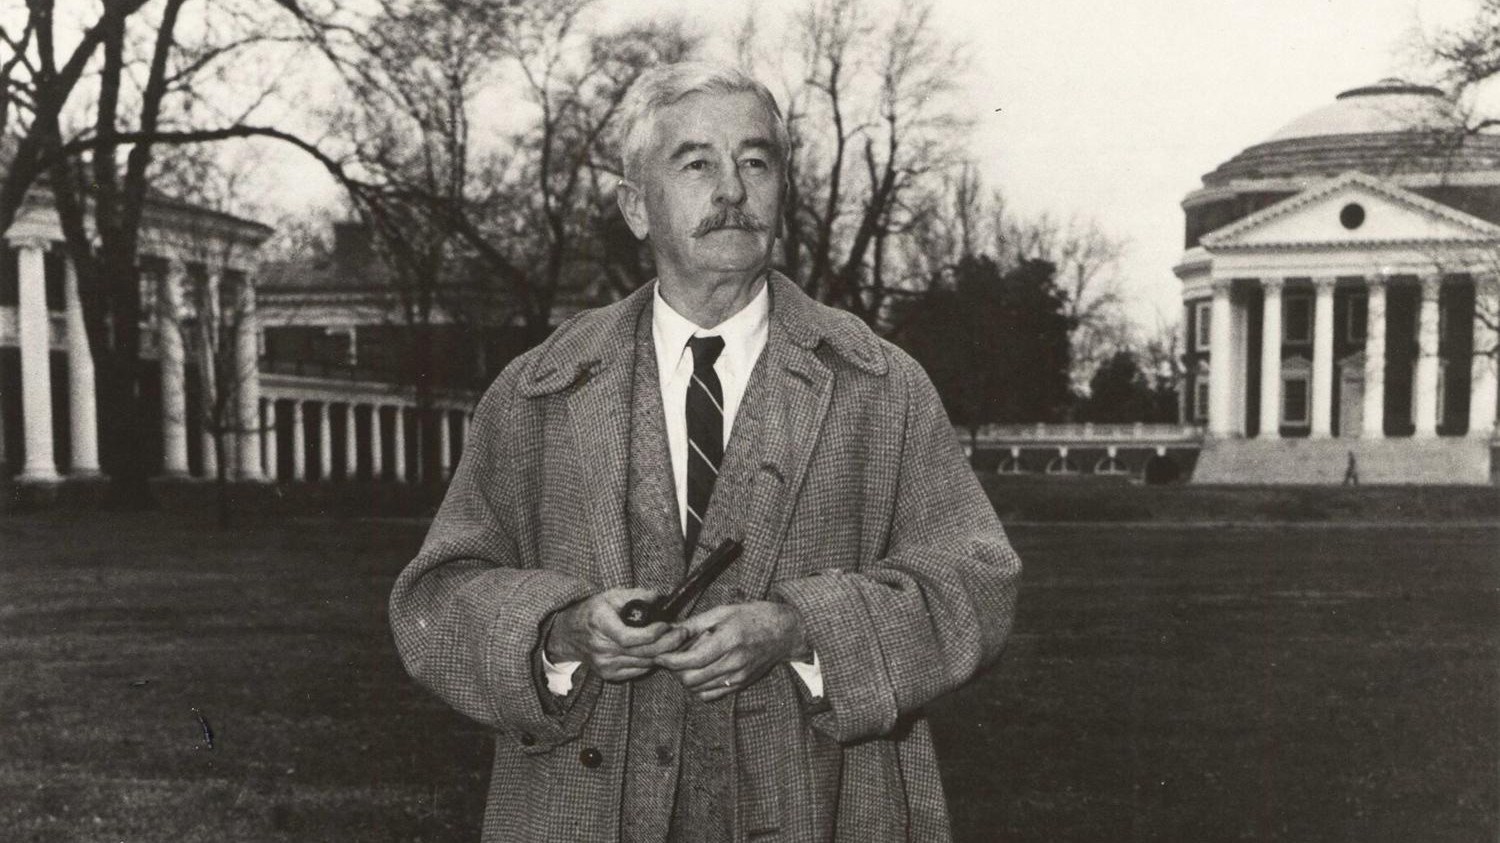 Faulkner standing on the lawn with a pipe. black and white image